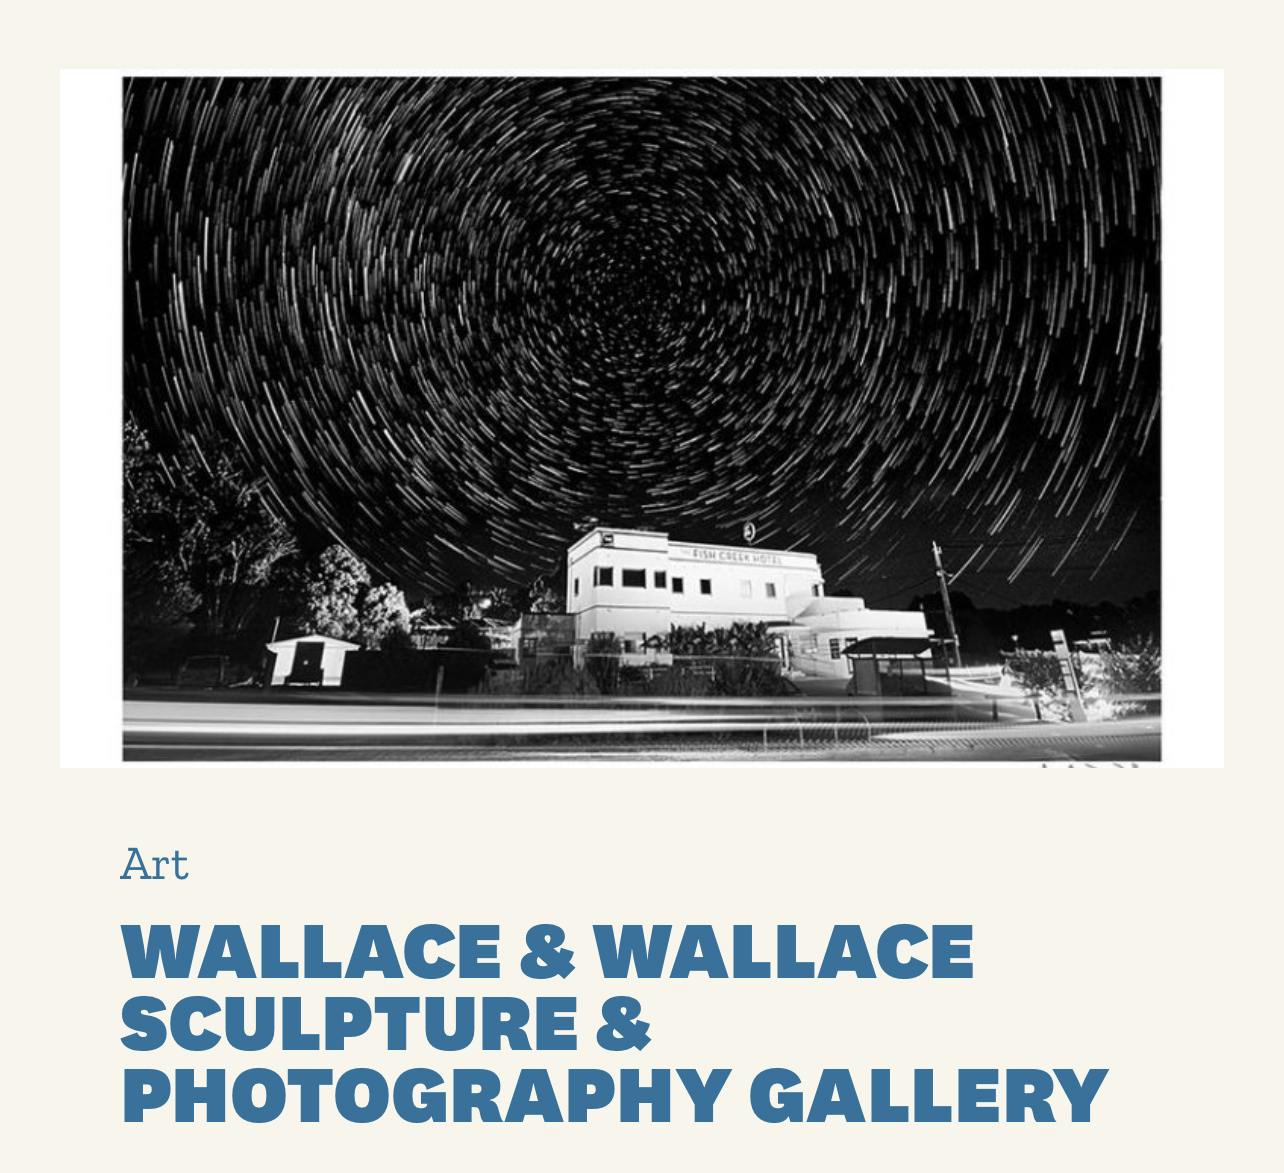 Wallace & Wallace Sculpture & Photography Gallery Fish Creek